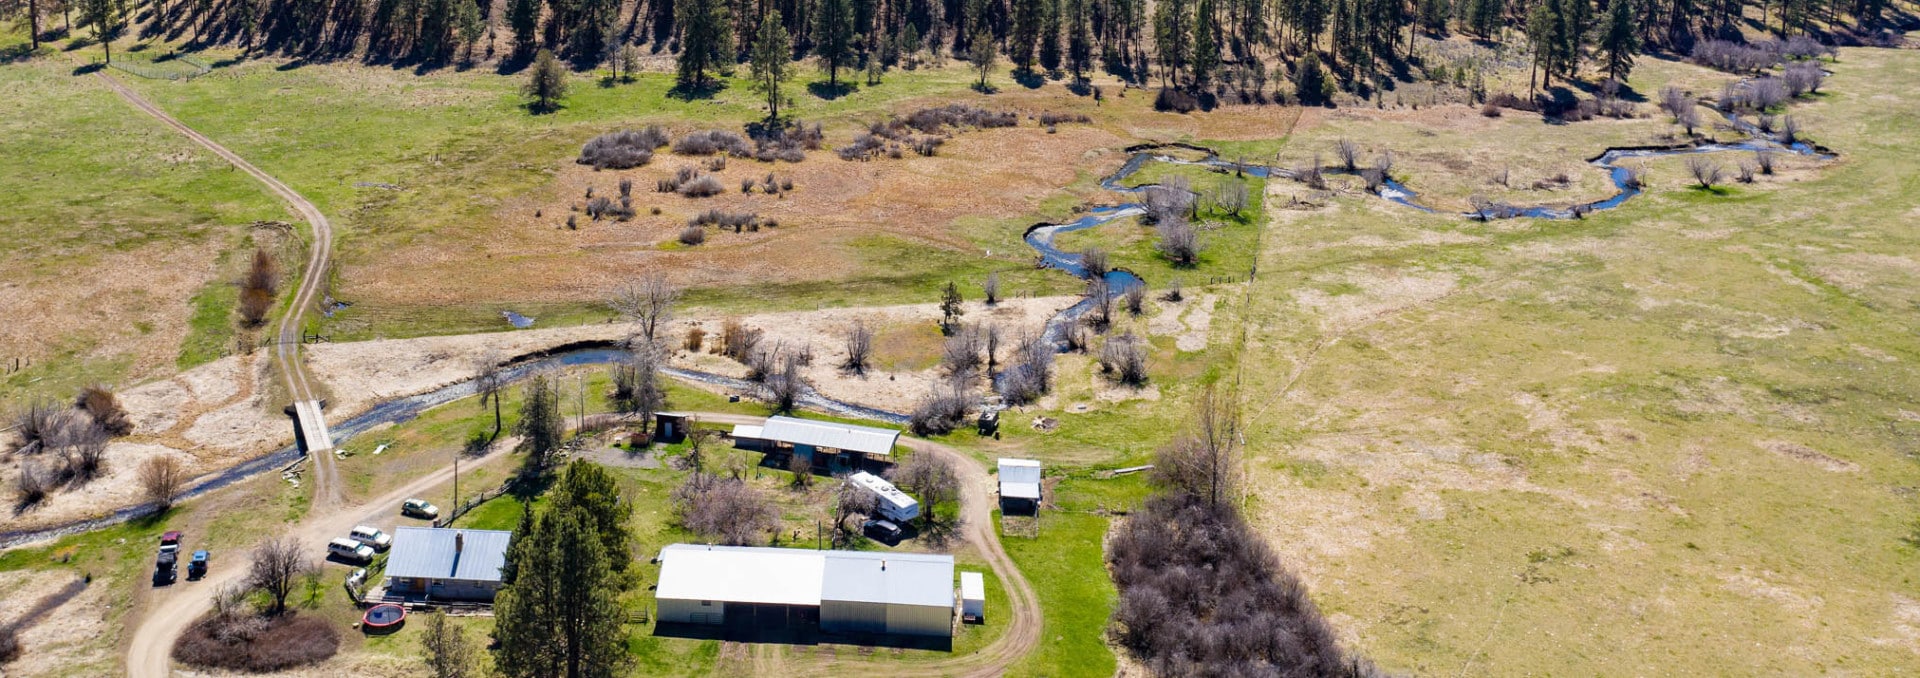 Oregon Ranch for Sale Gateway to the magnificent Ochocos